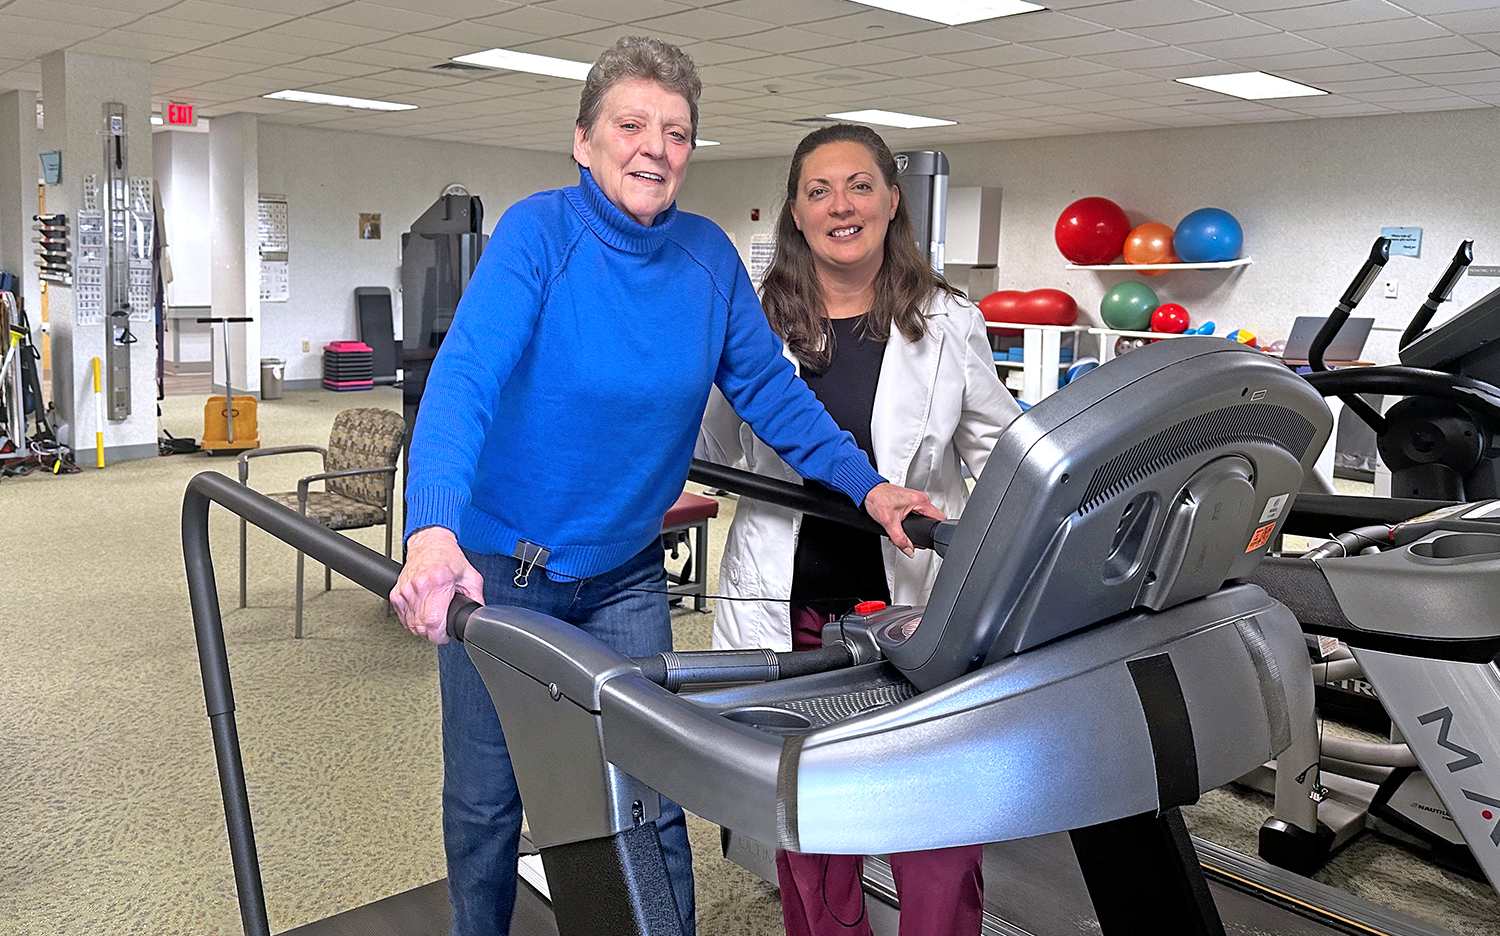 After a life-changing accident and successful recovery at Whittier Rehabilitation Hospital-Bradford, Diane Blunt wants her story to be a source of hope for others.